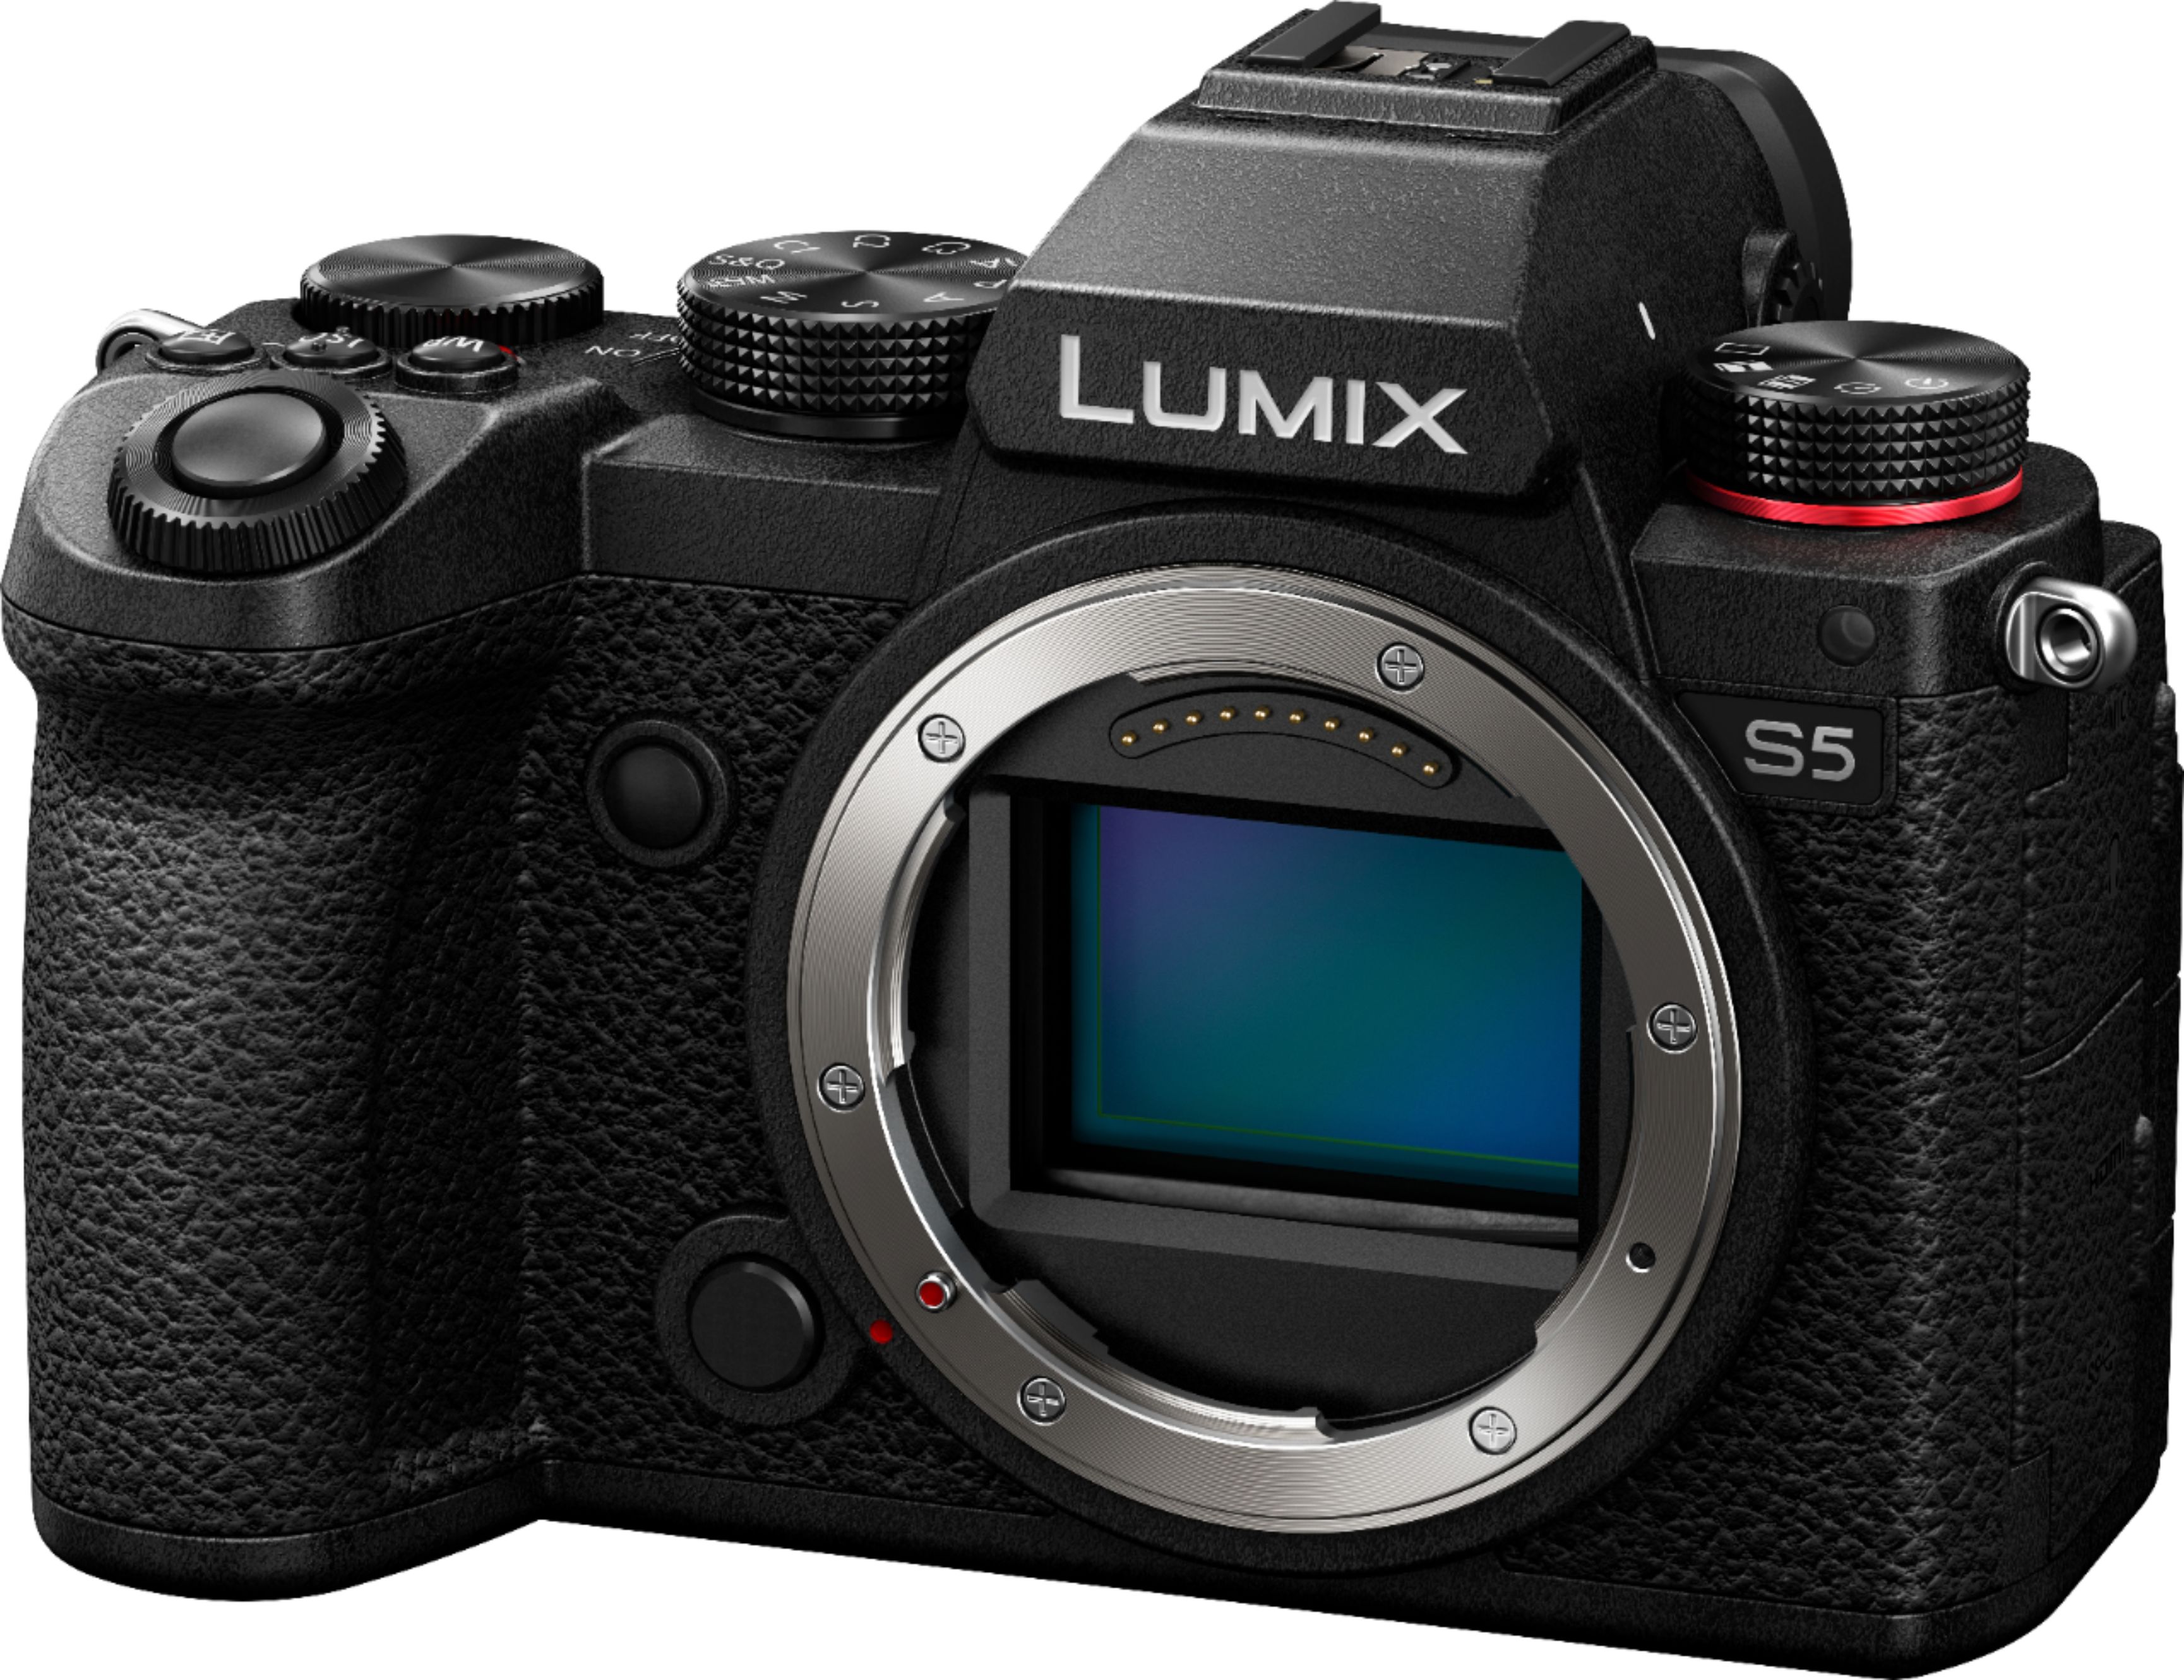 This $300 Panasonic Lumix S5 II saving could be one of the last Cyber  Monday camera deals